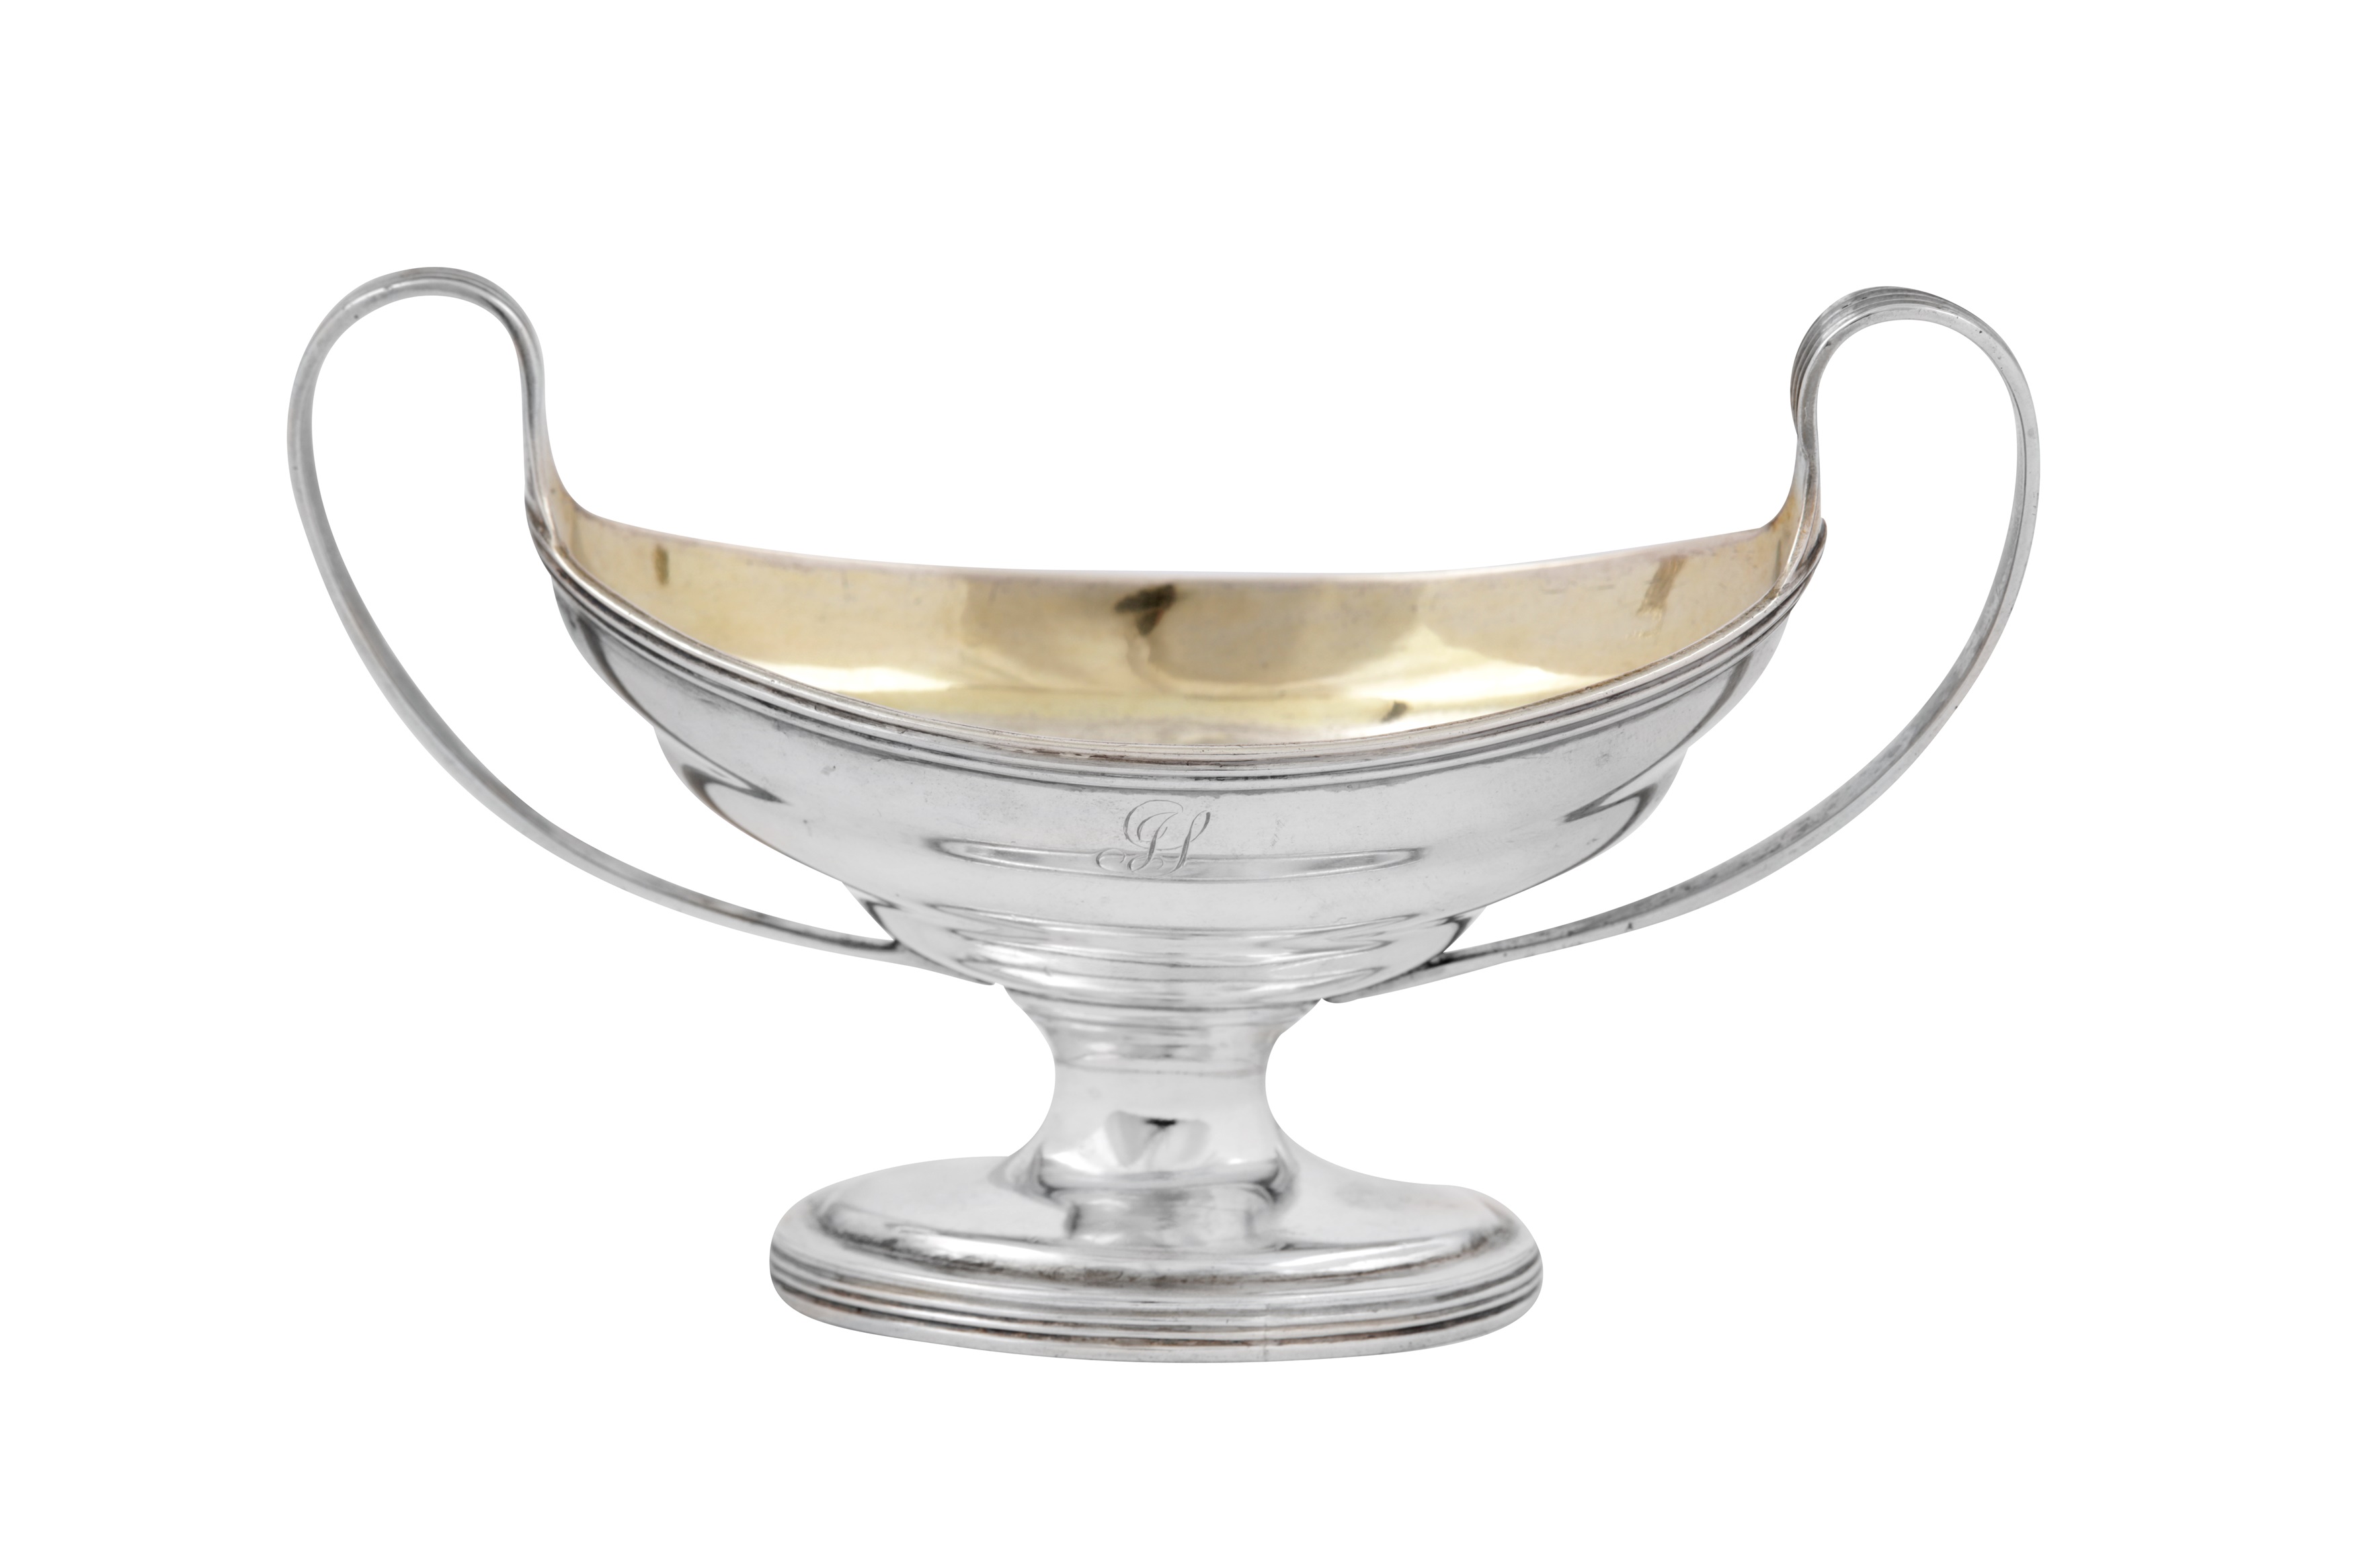 A set of four George III sterling silver salts, London 1804 by William Abdy II - Image 4 of 10